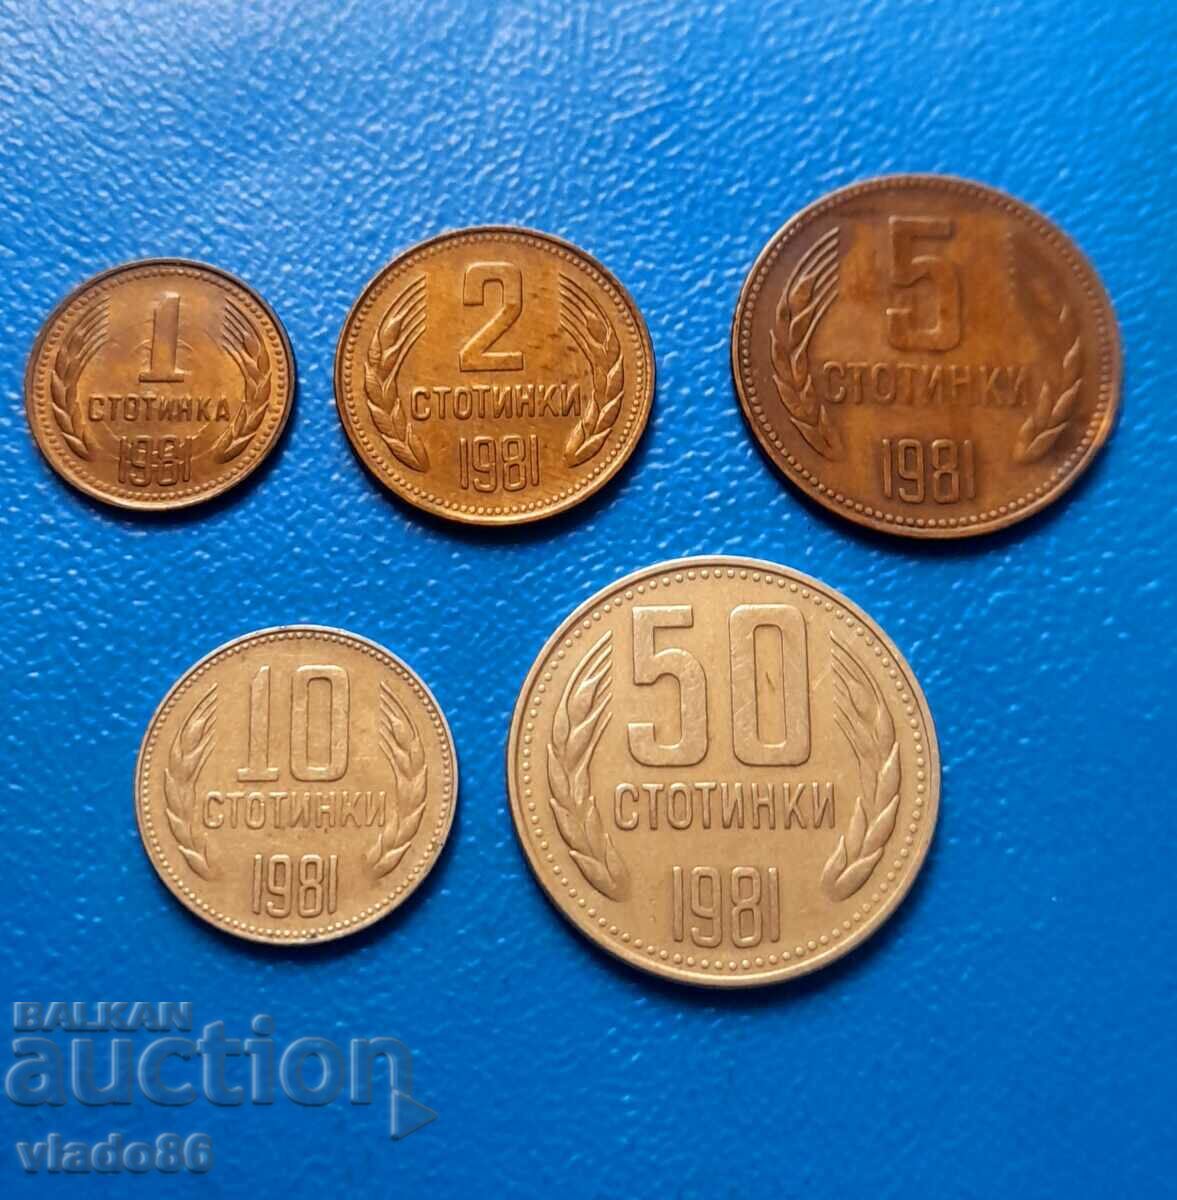 1, 2, 5, 10 and 50 cents 1981